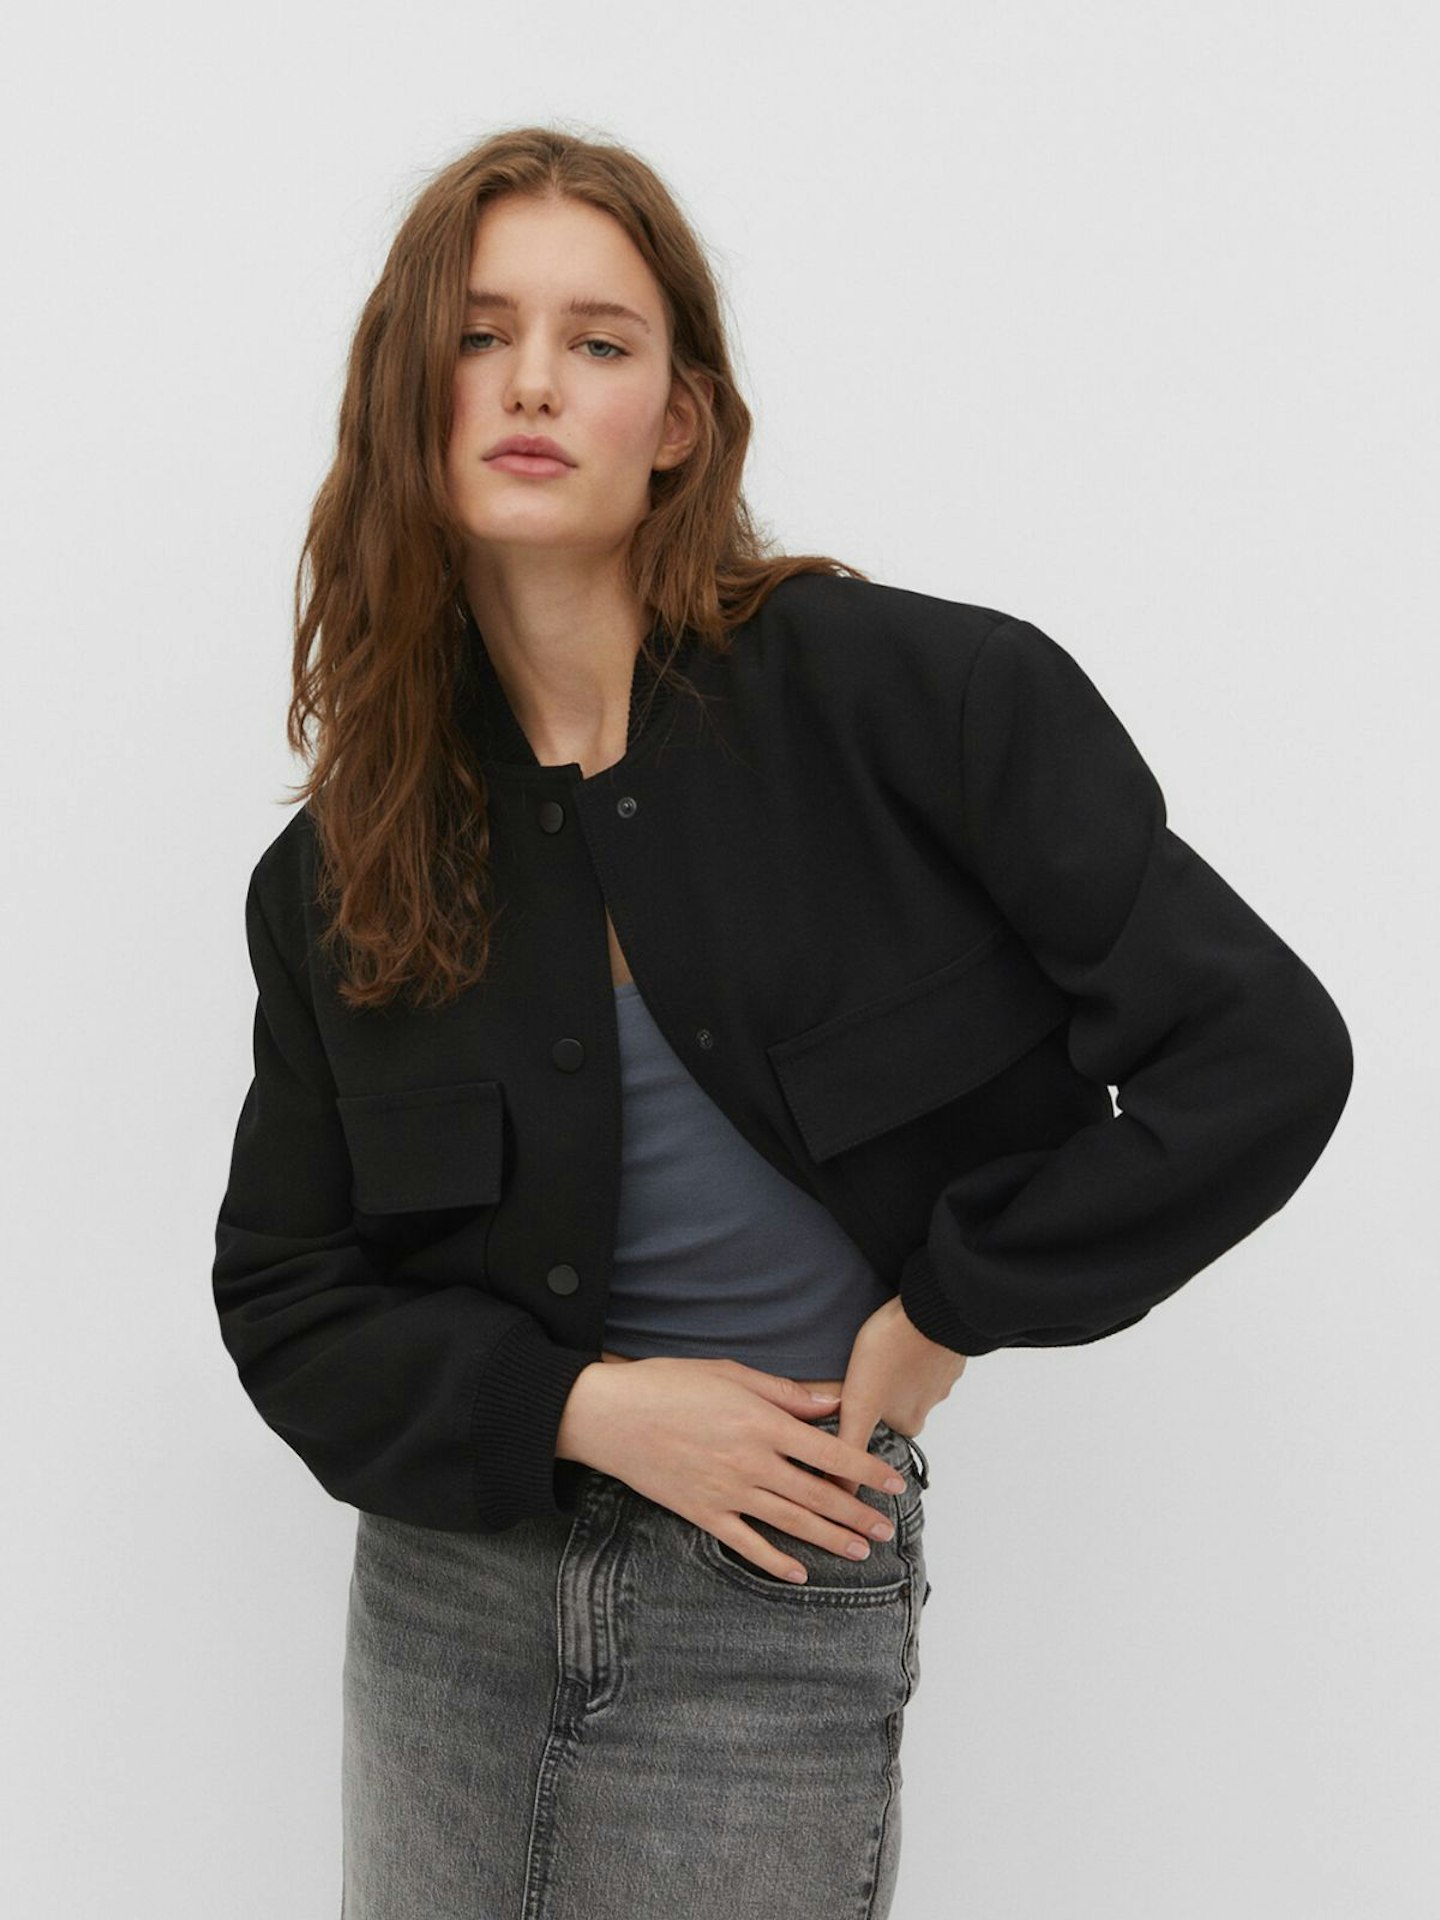 11 Best Bomber Jackets That Will Save Your Outfit Every Time